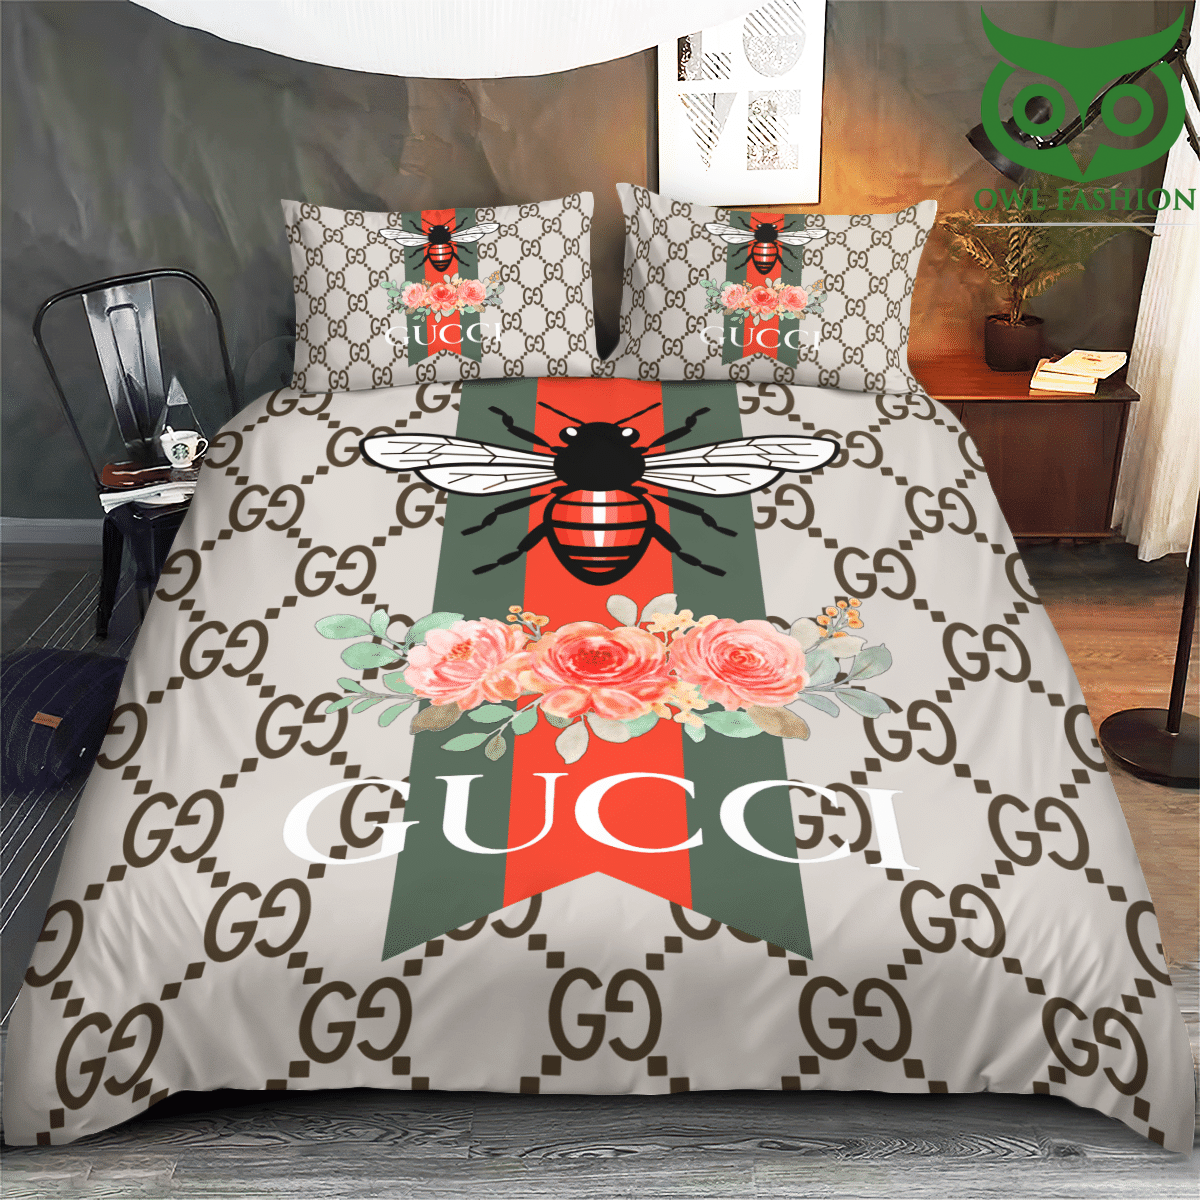 Rose and bee Gucci luxury bedding set